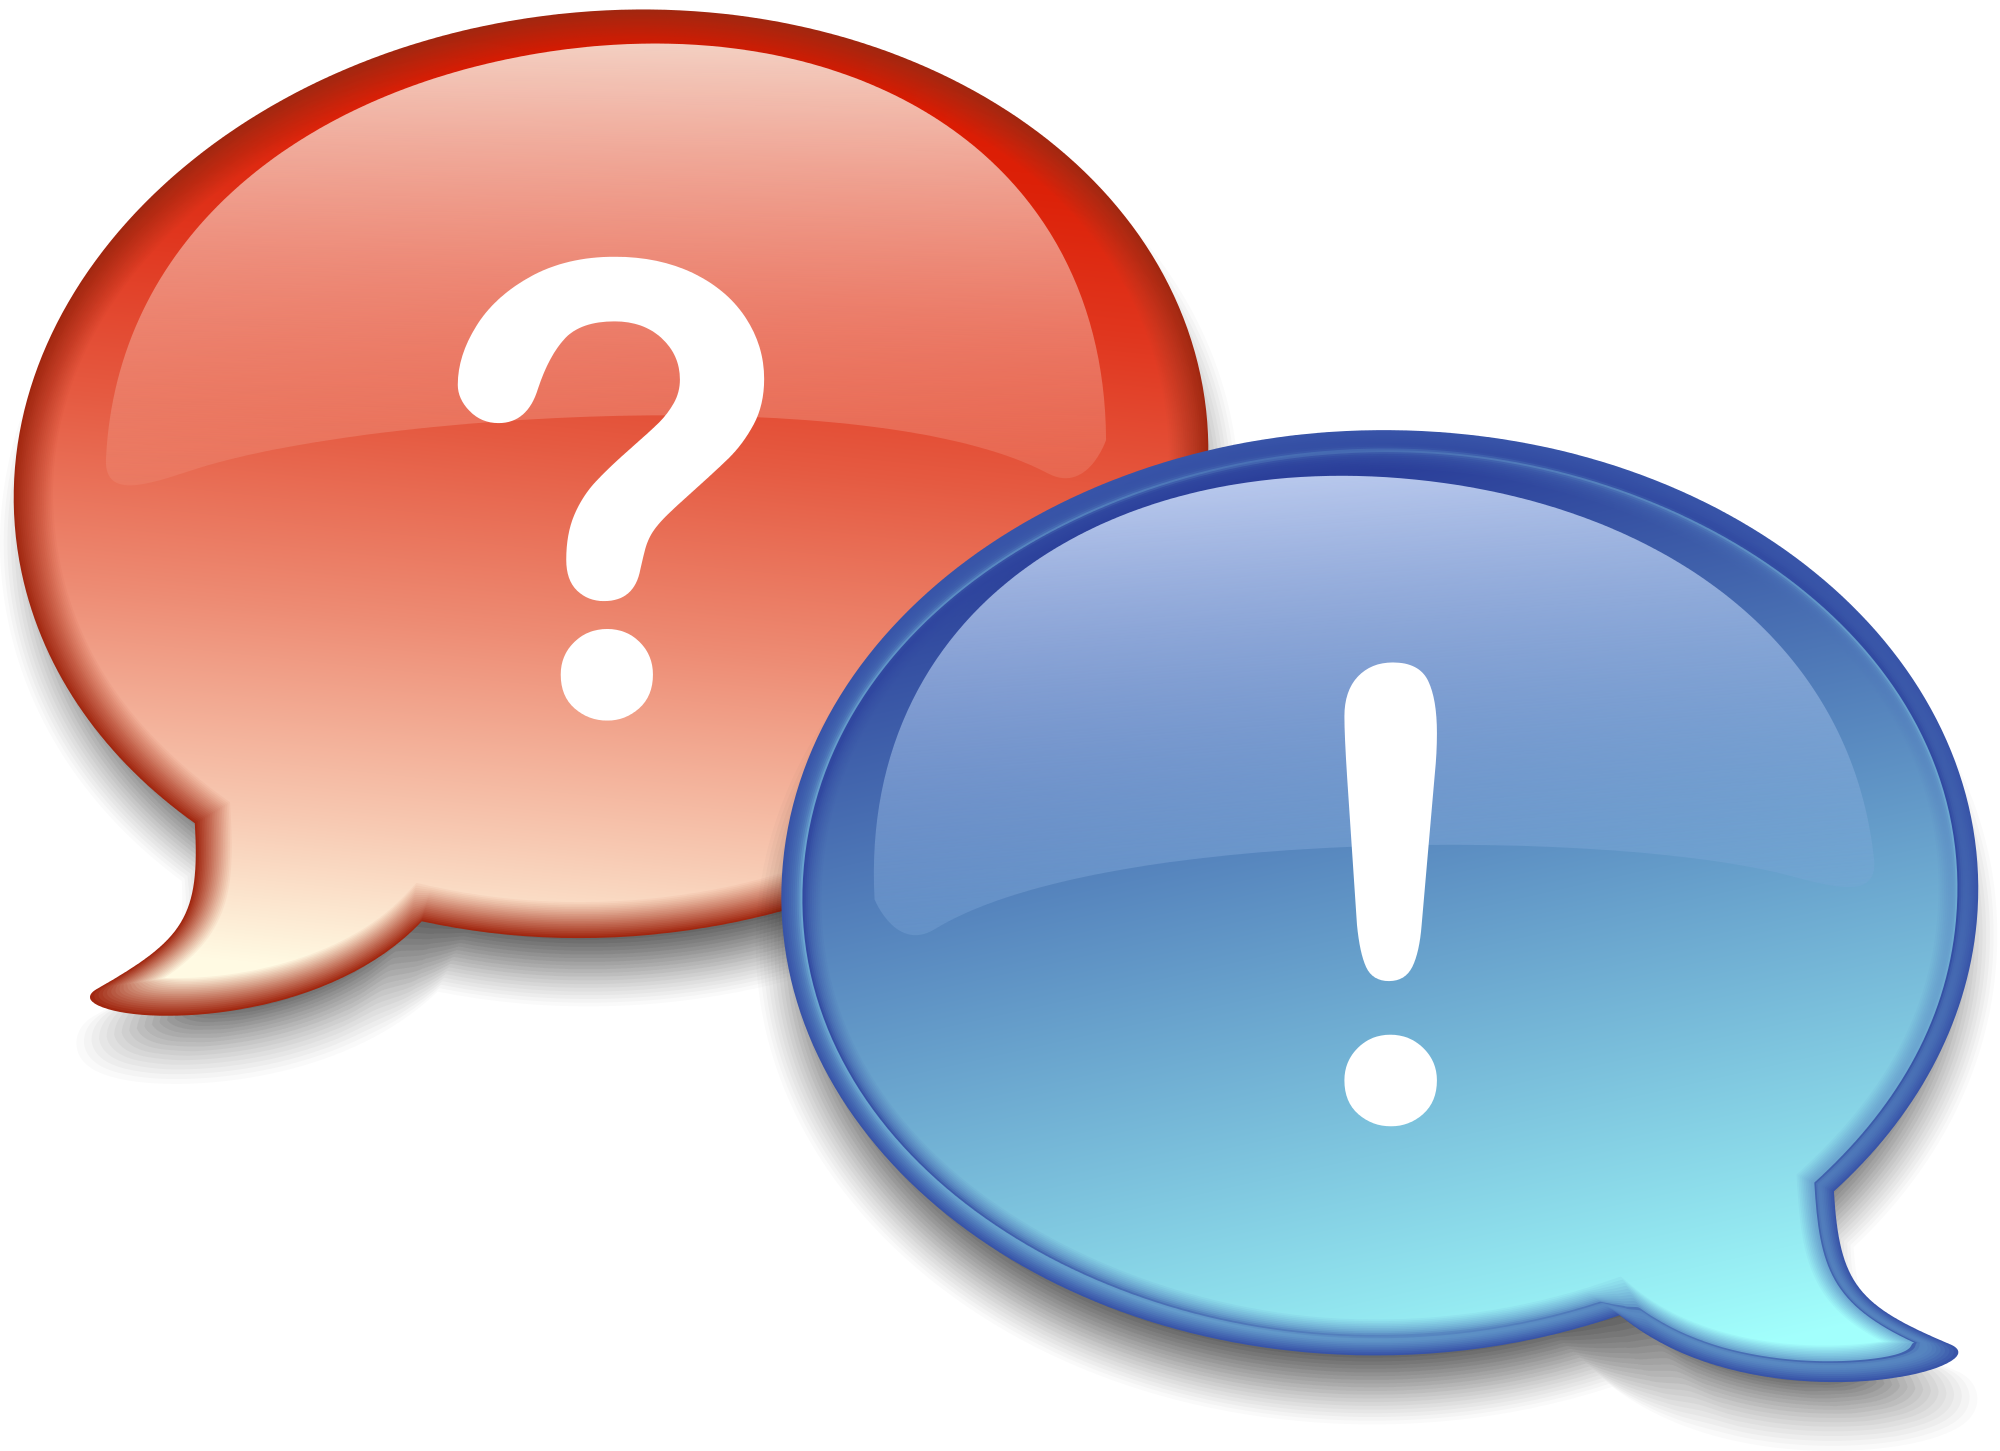 Questions and answers clipart clipart images gallery for.